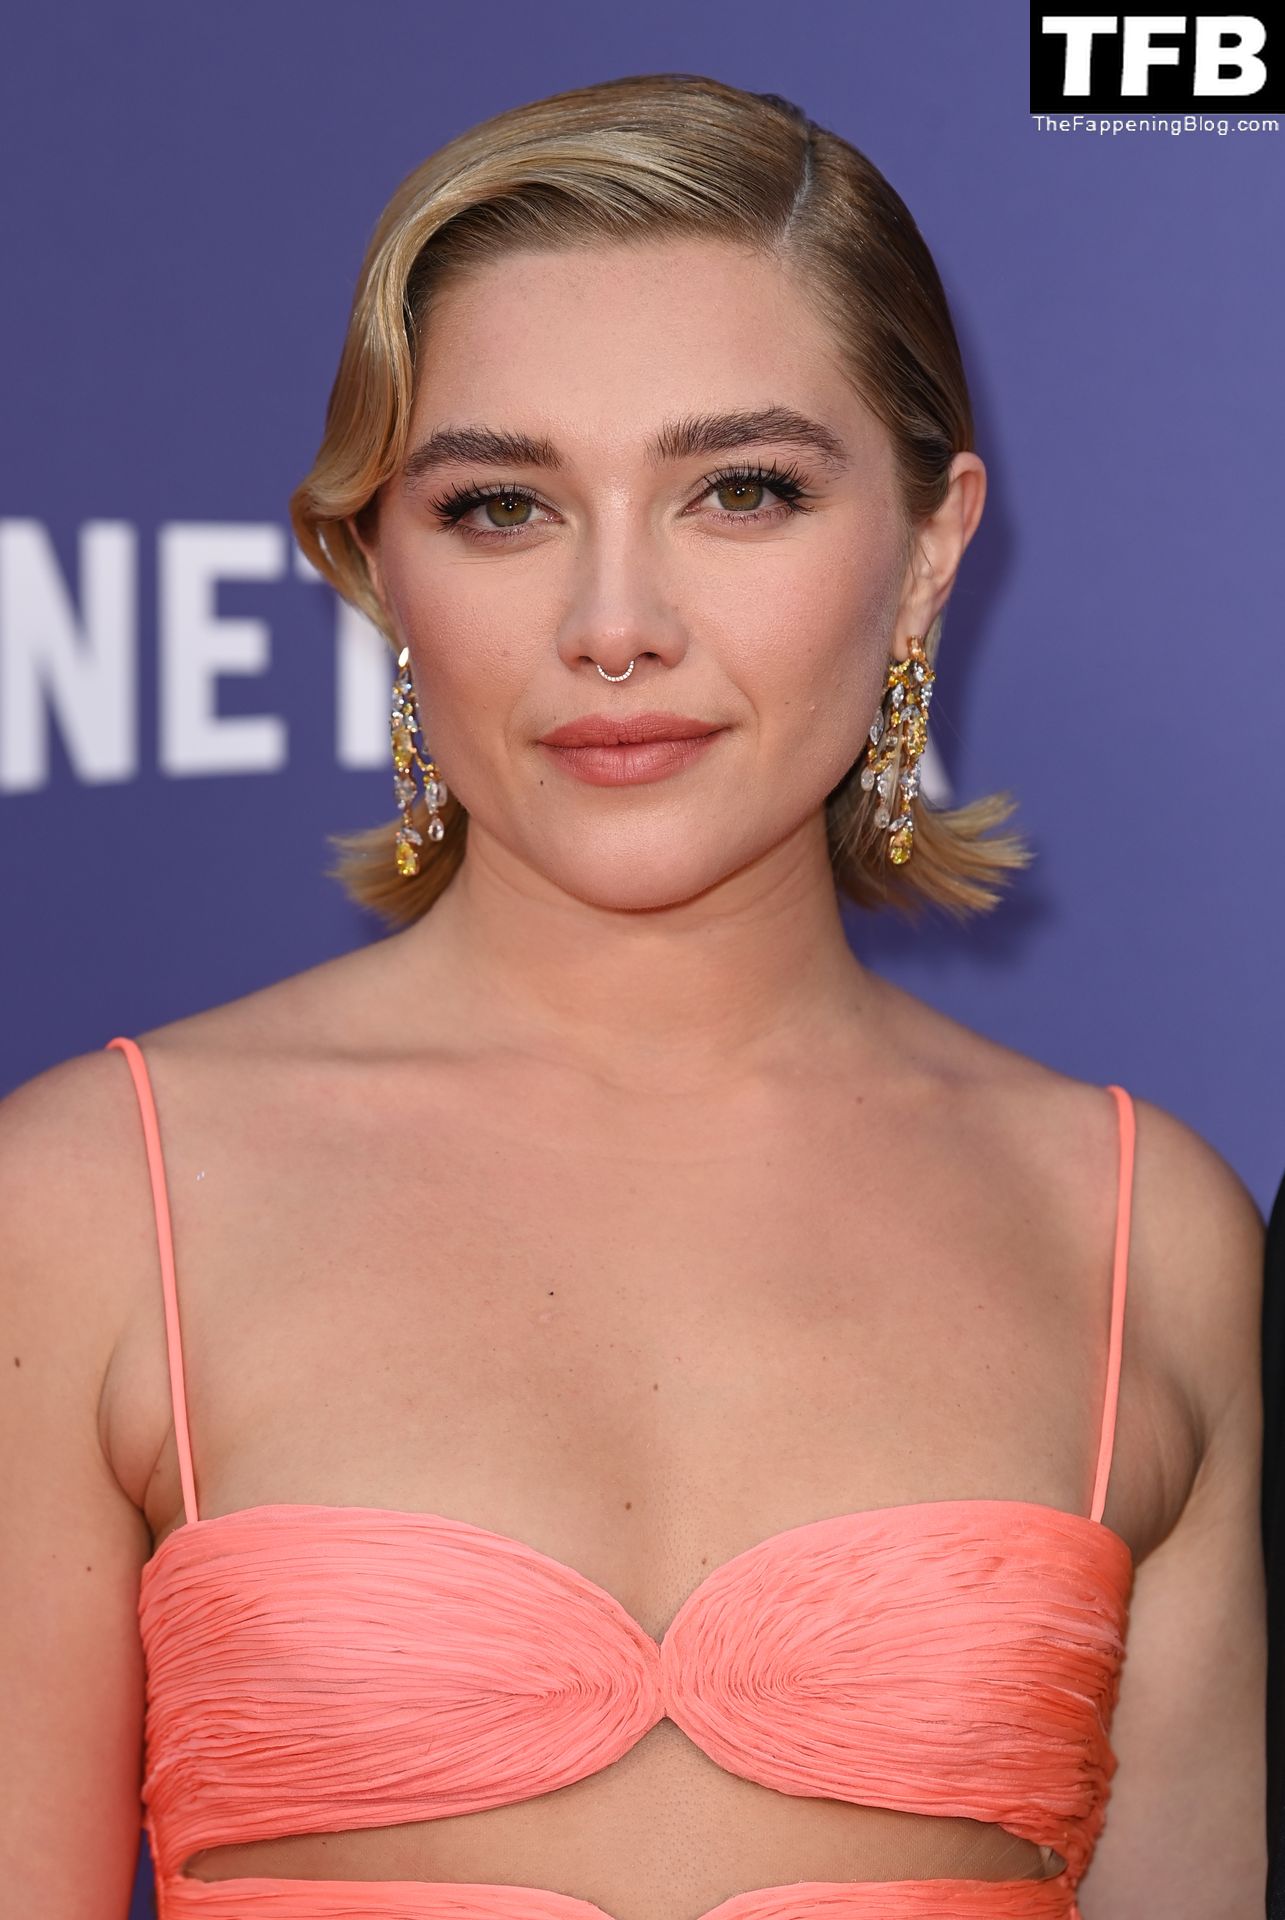 Florence-Pugh-Sexy-The-Fappening-Blog-65-1.jpg